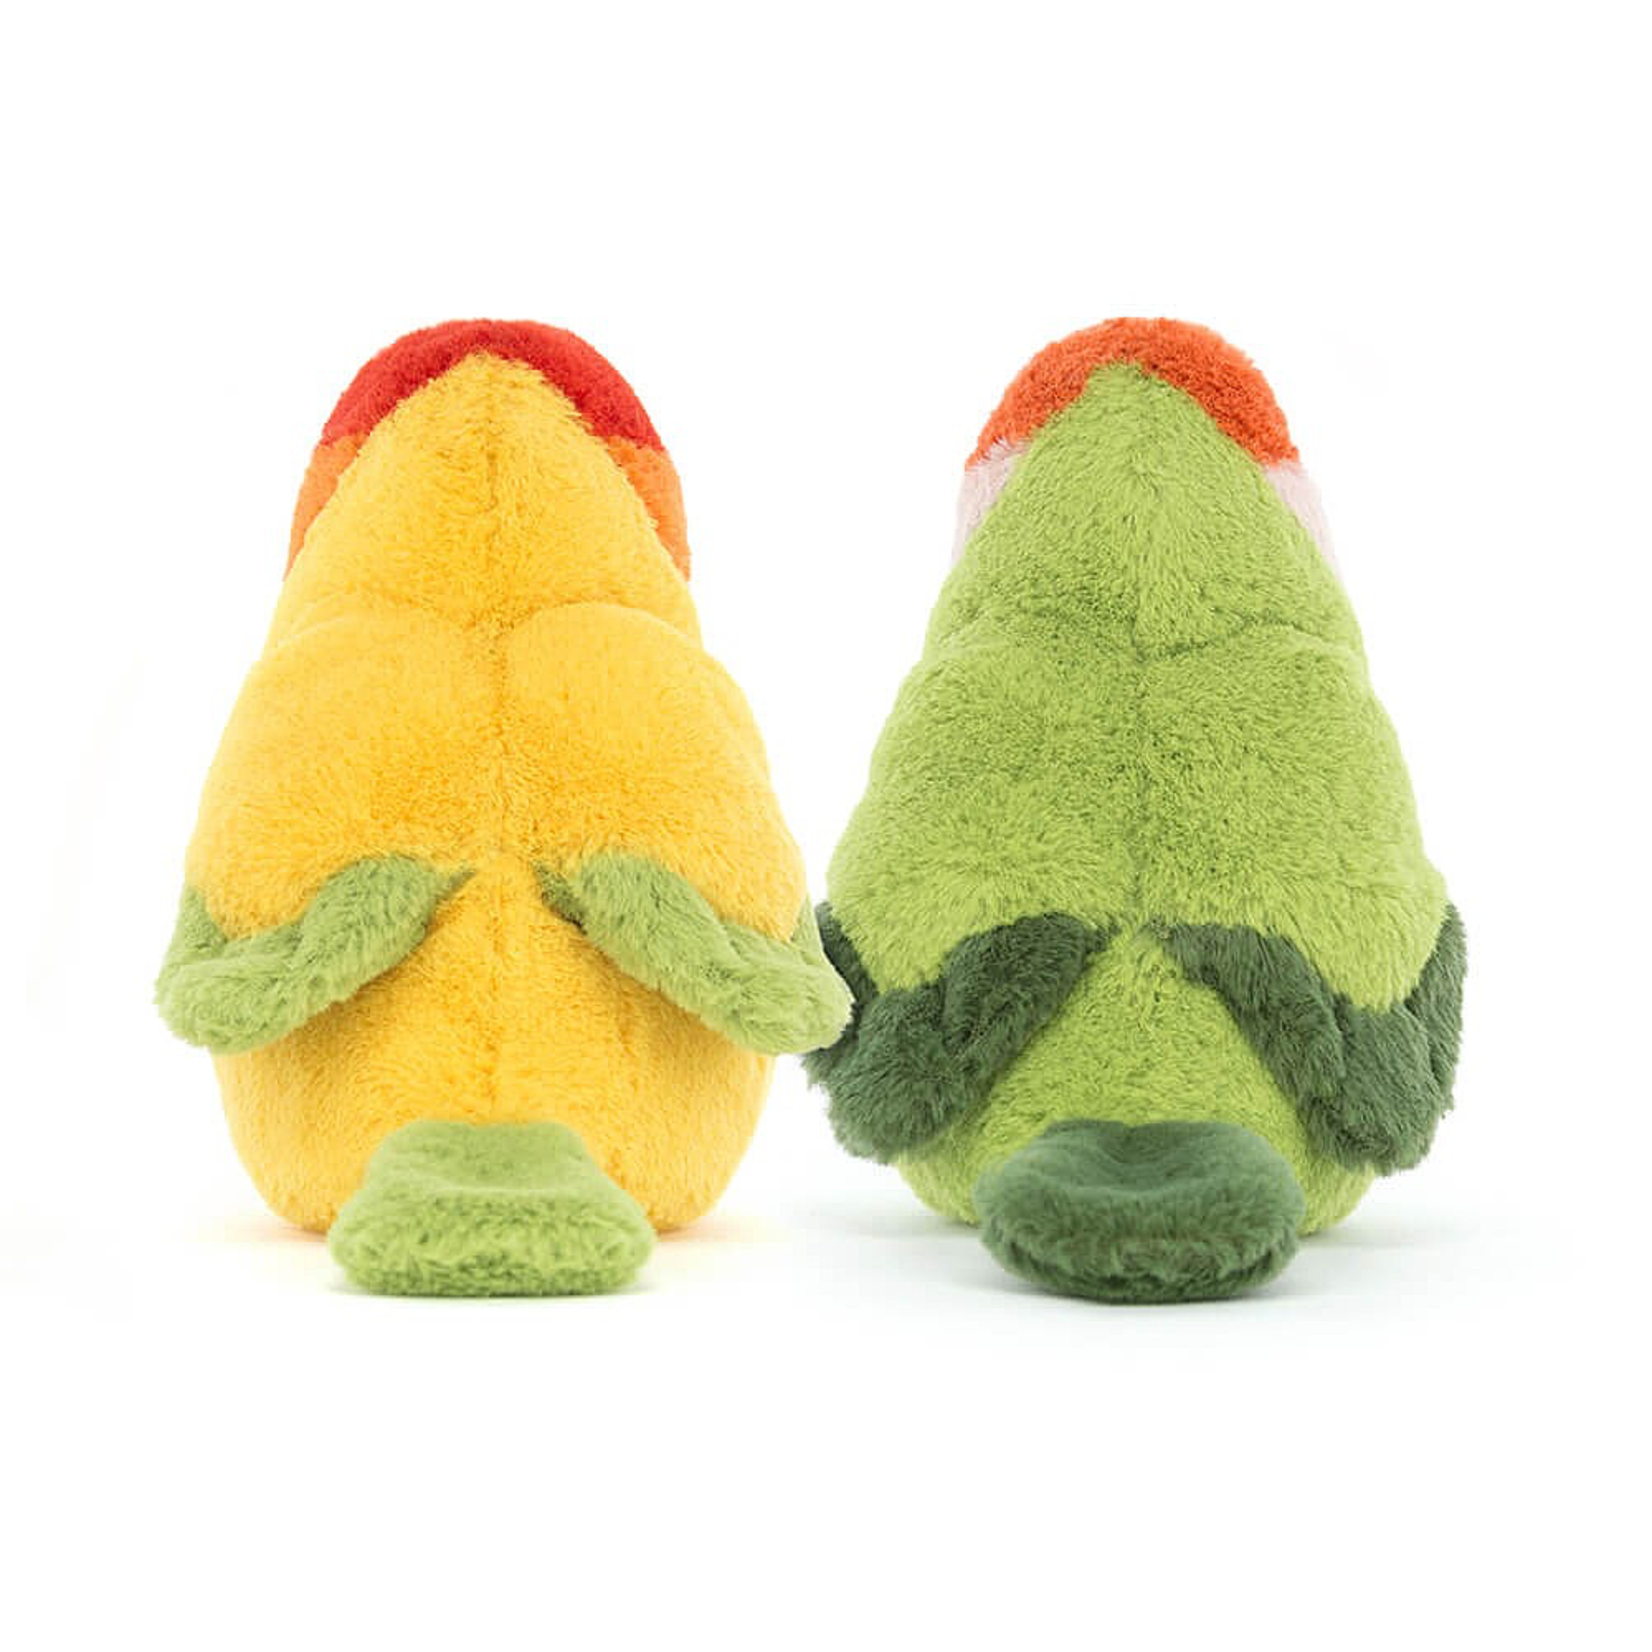 Jellycat - Colourful & Quirky Jellycat - A Pair of Lovely Lovebirds